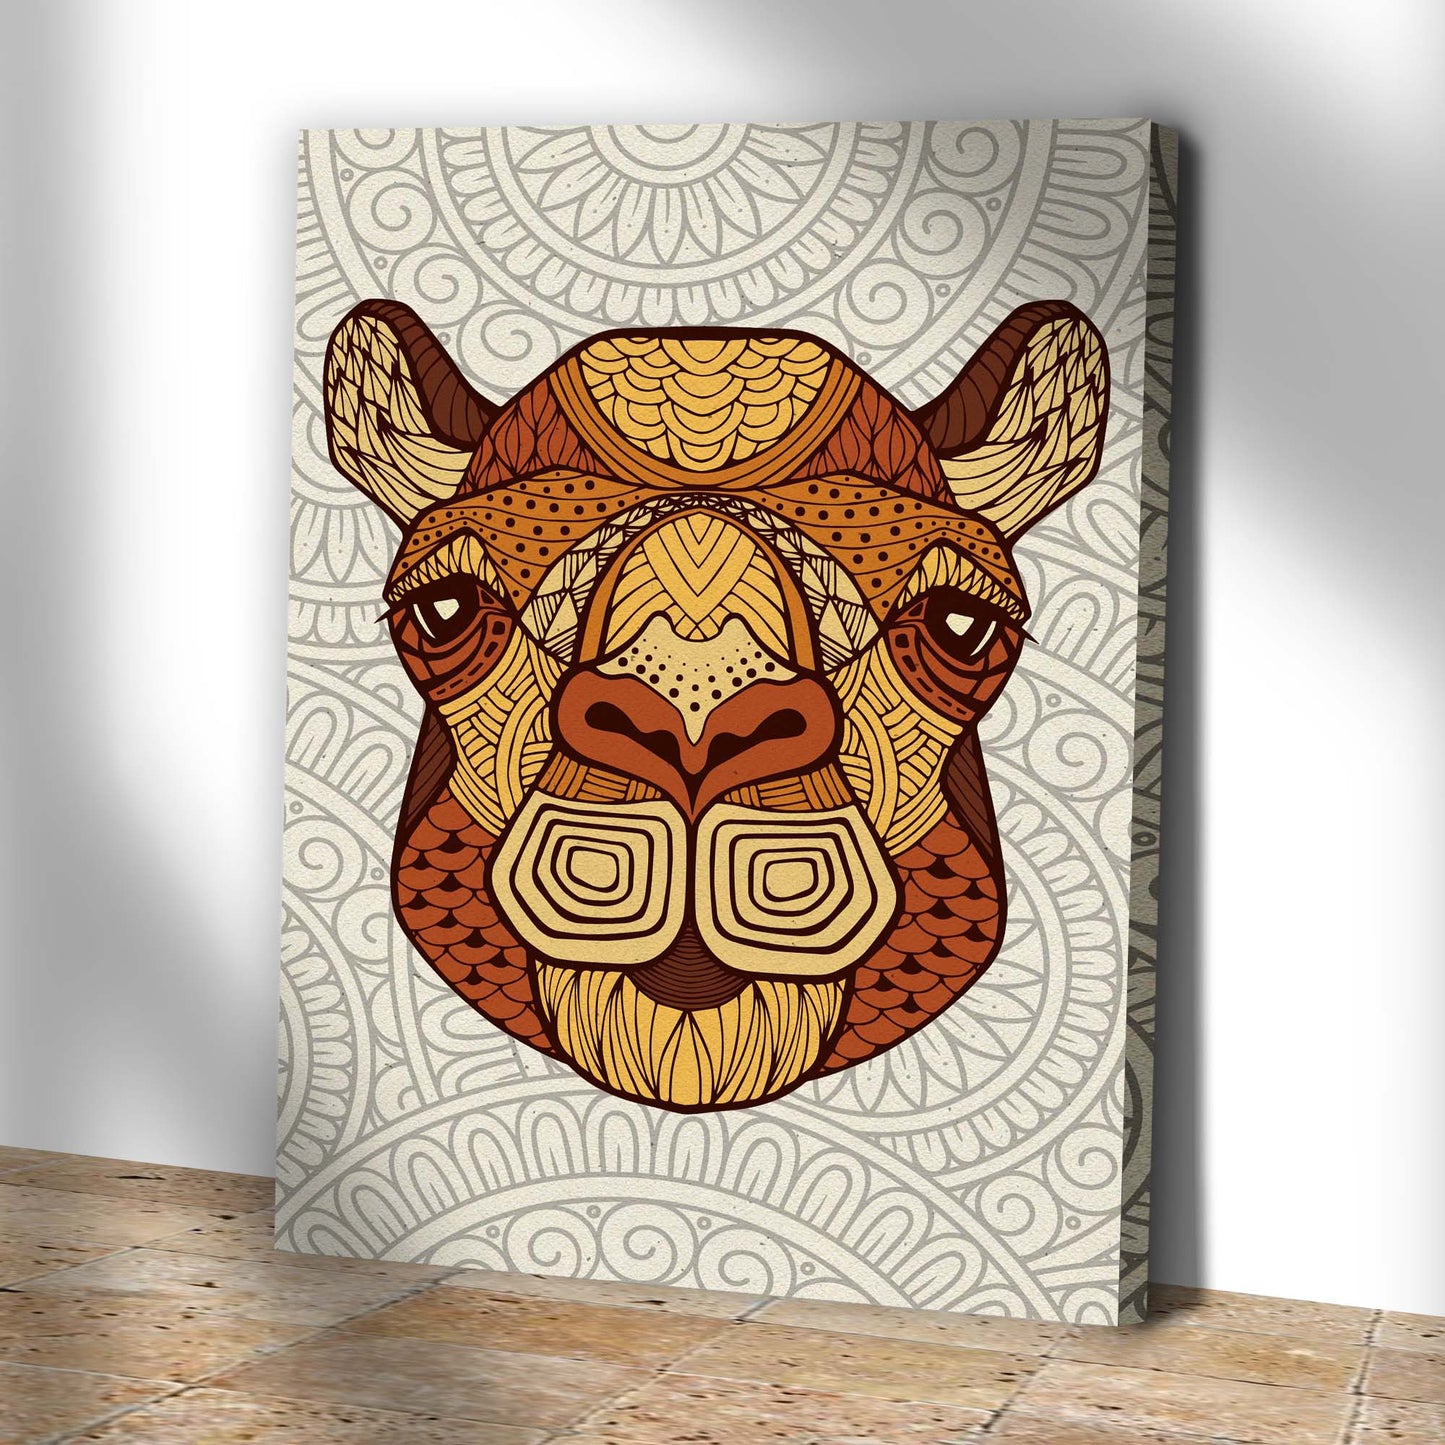 Zentangle Camel Head Canvas Wall Art Style 2 - Image by Tailored Canvases